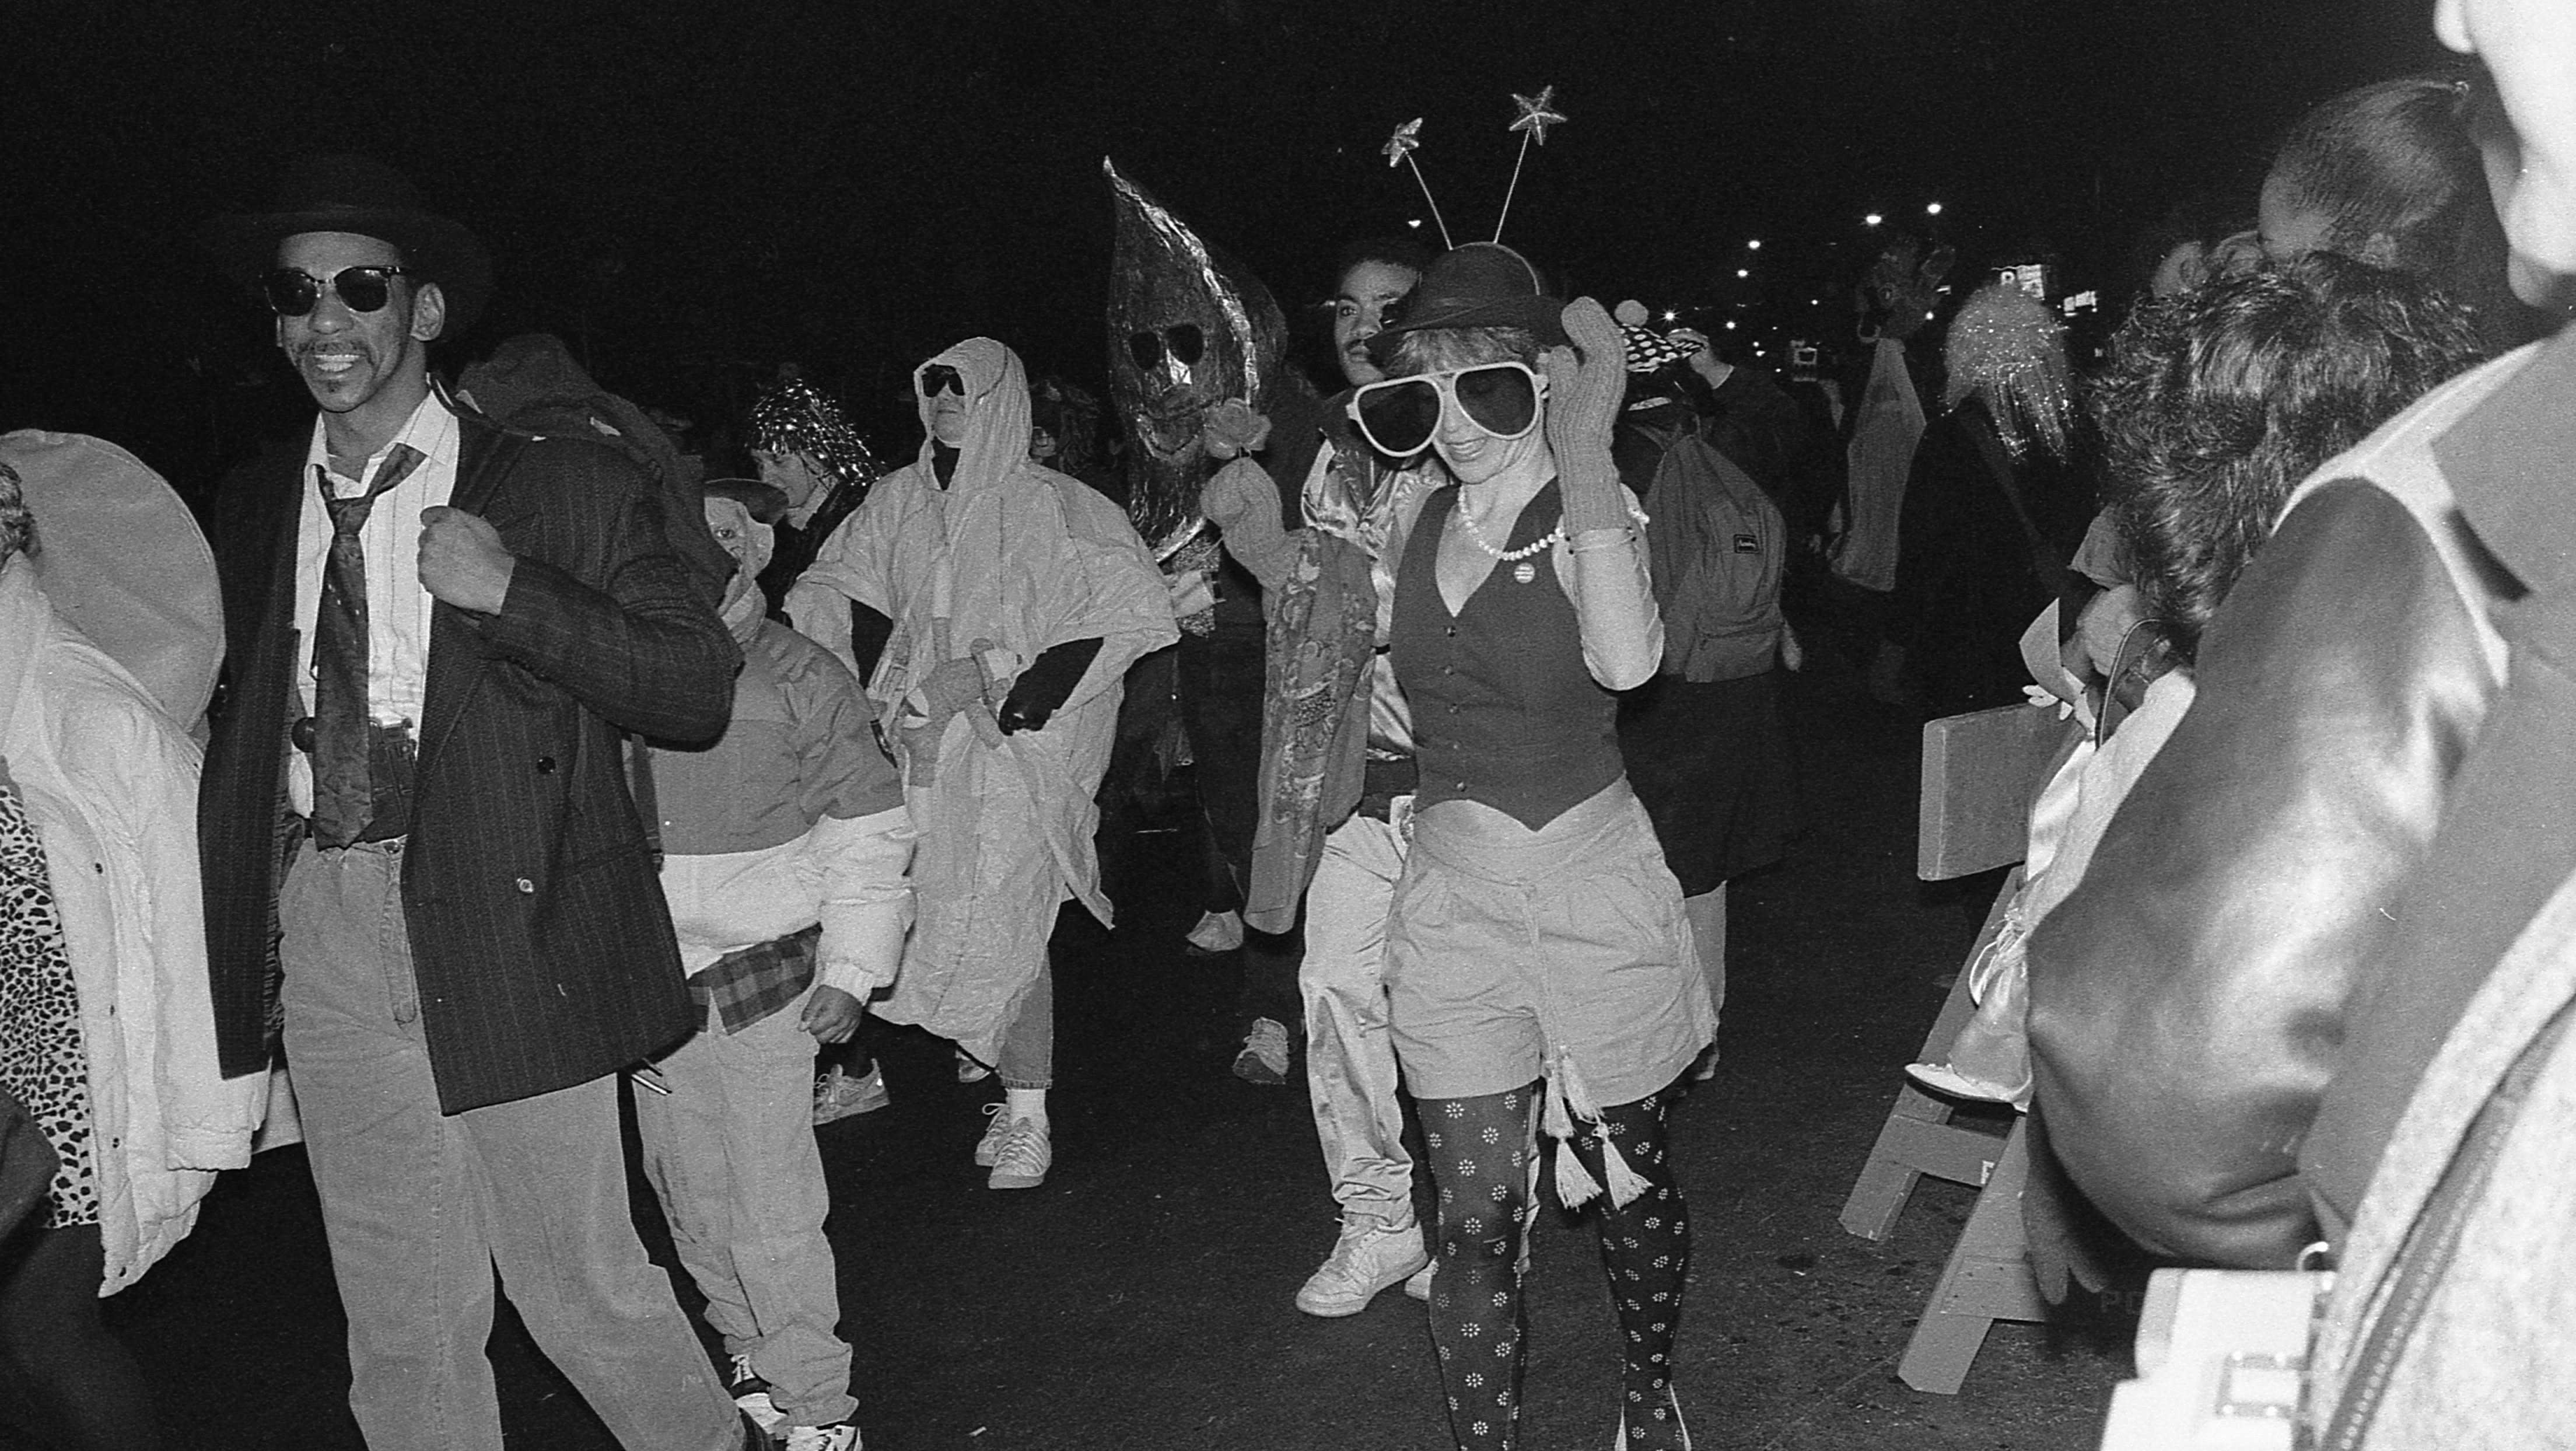 People attend New York's annual Village Halloween Parade, New York, NY, October 31, 1988 Halloween facts